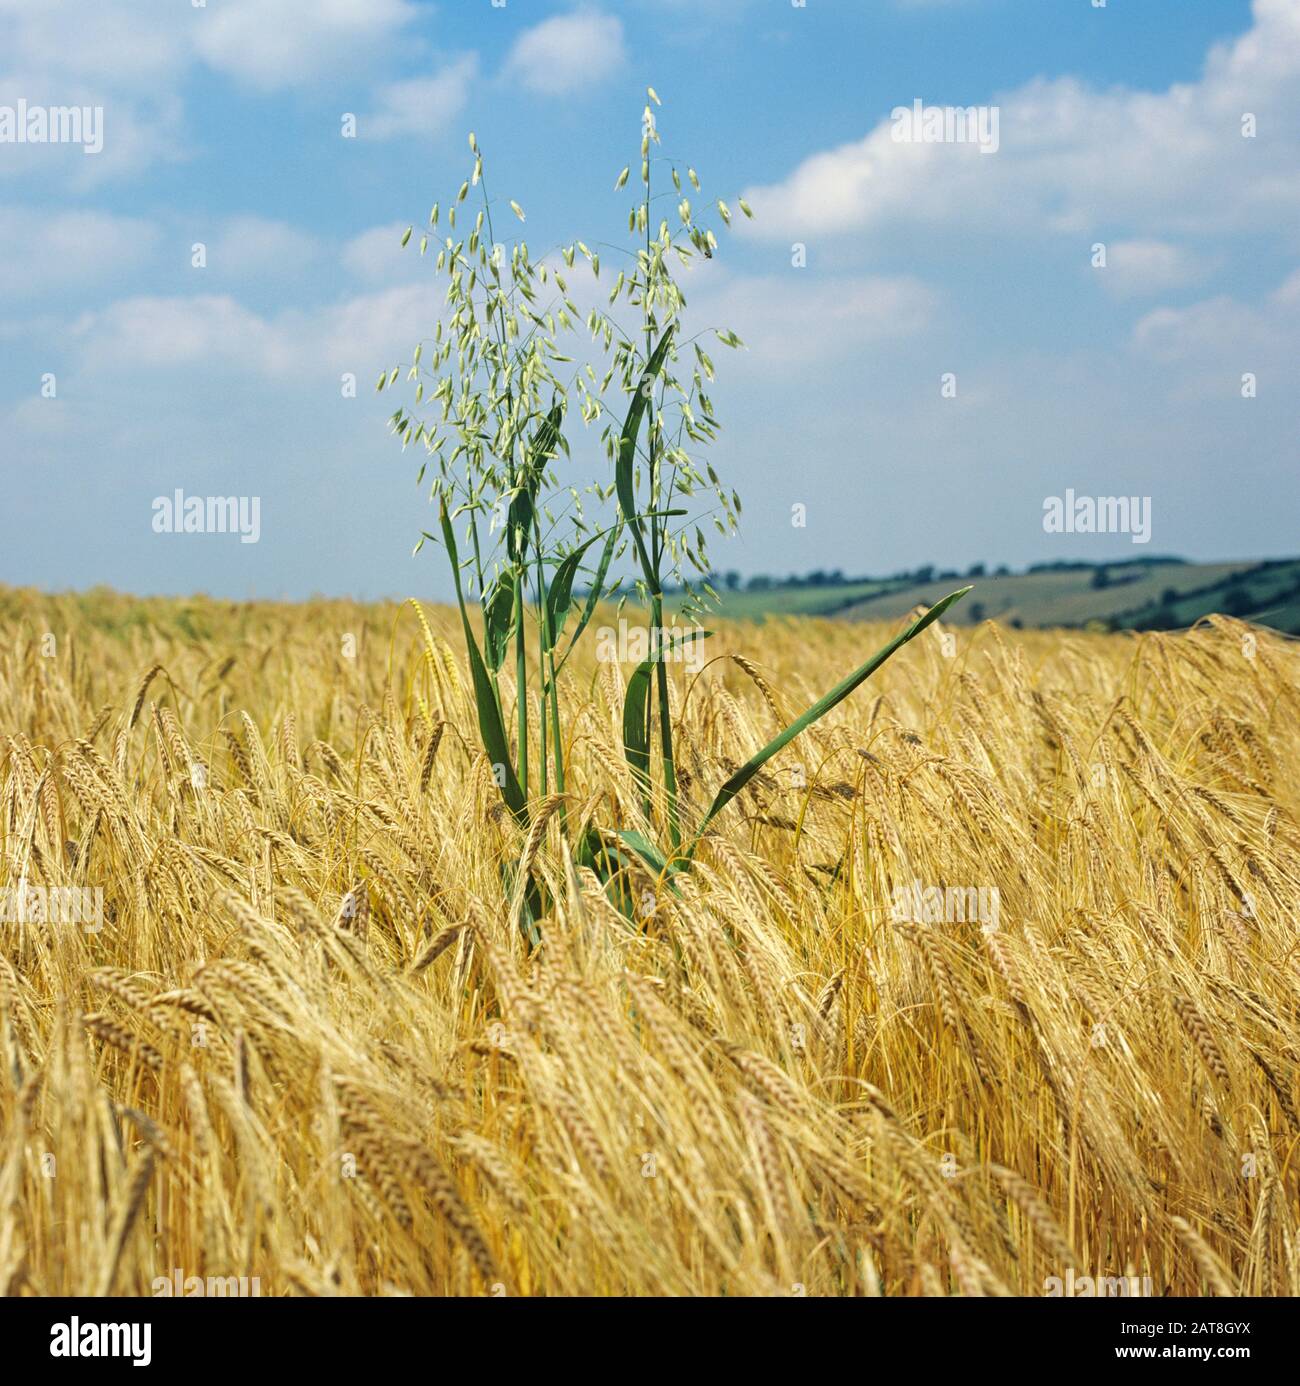 Wild oats (Avena fatua) flowering grasses with green leaves and panicles in ripe golden barley crop Stock Photo